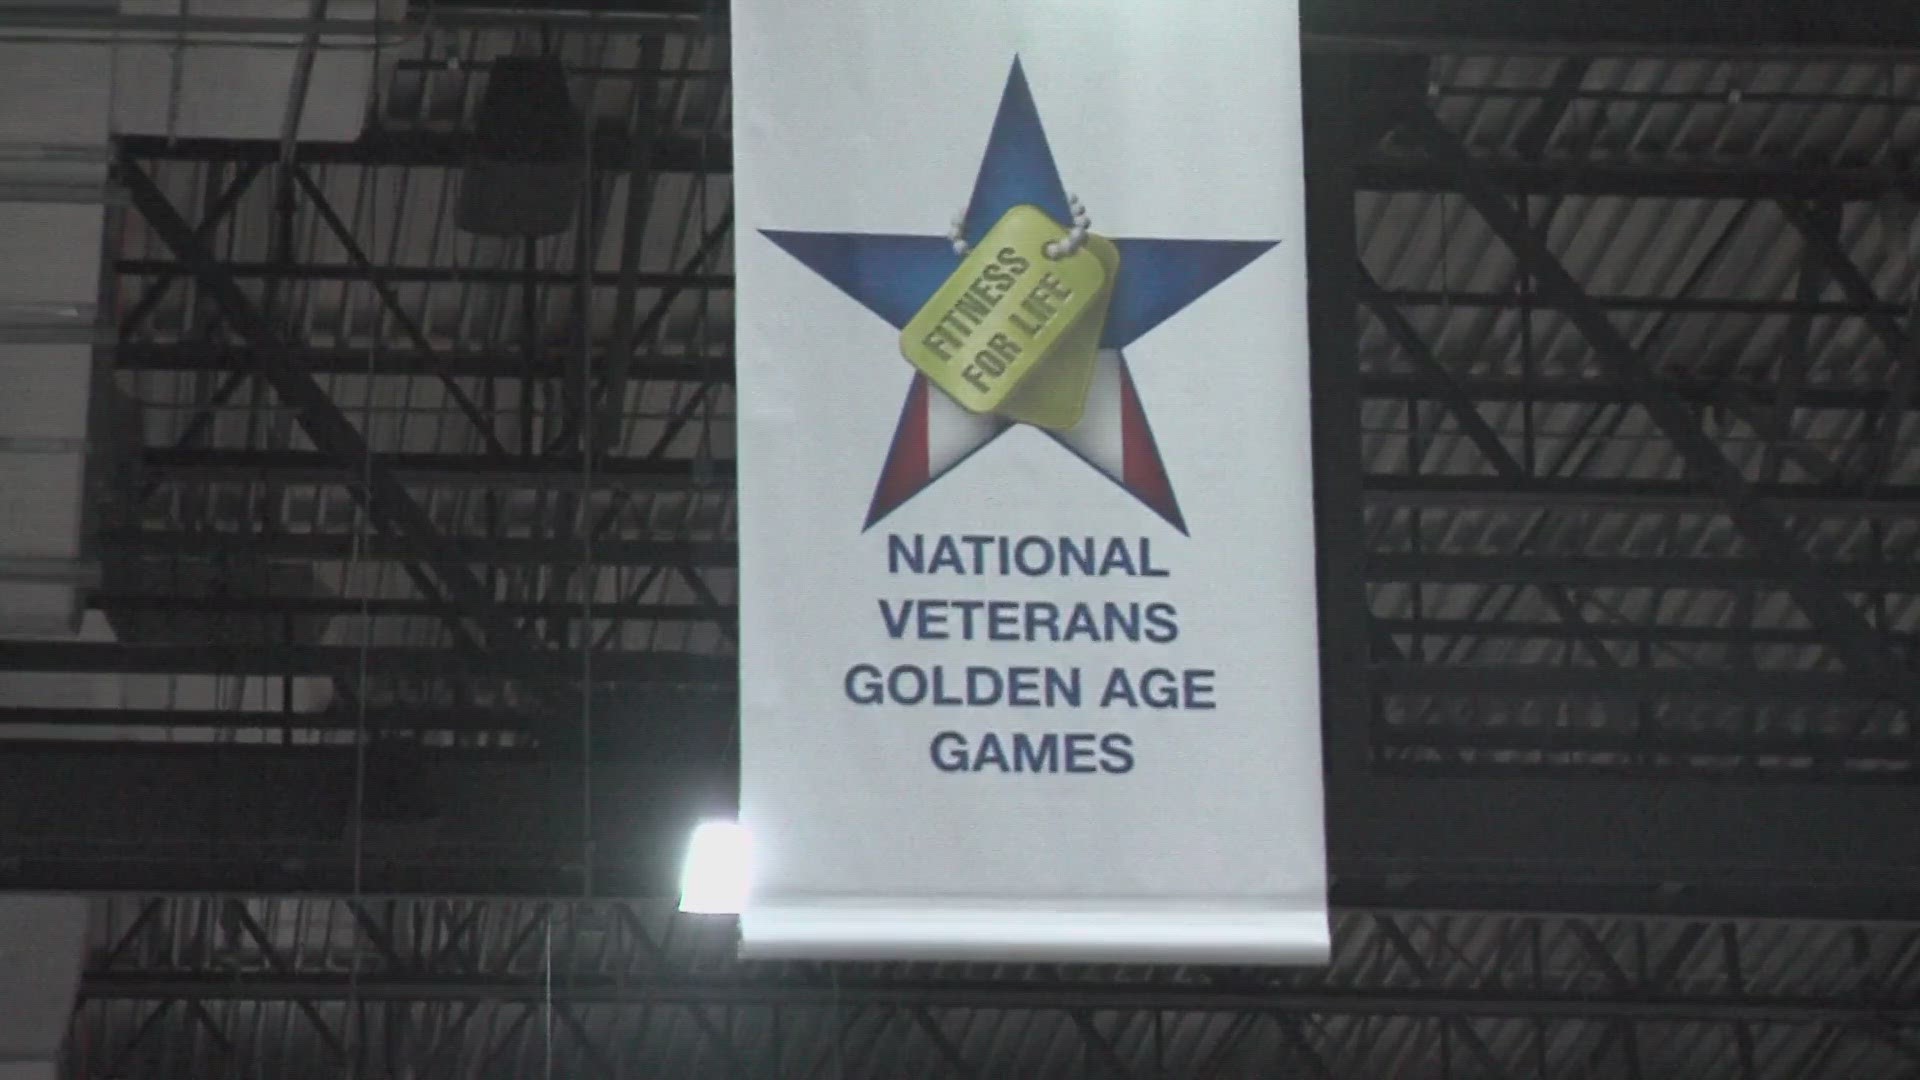 The games featured more than a dozen events that veterans 55 and older from across the country competed in.